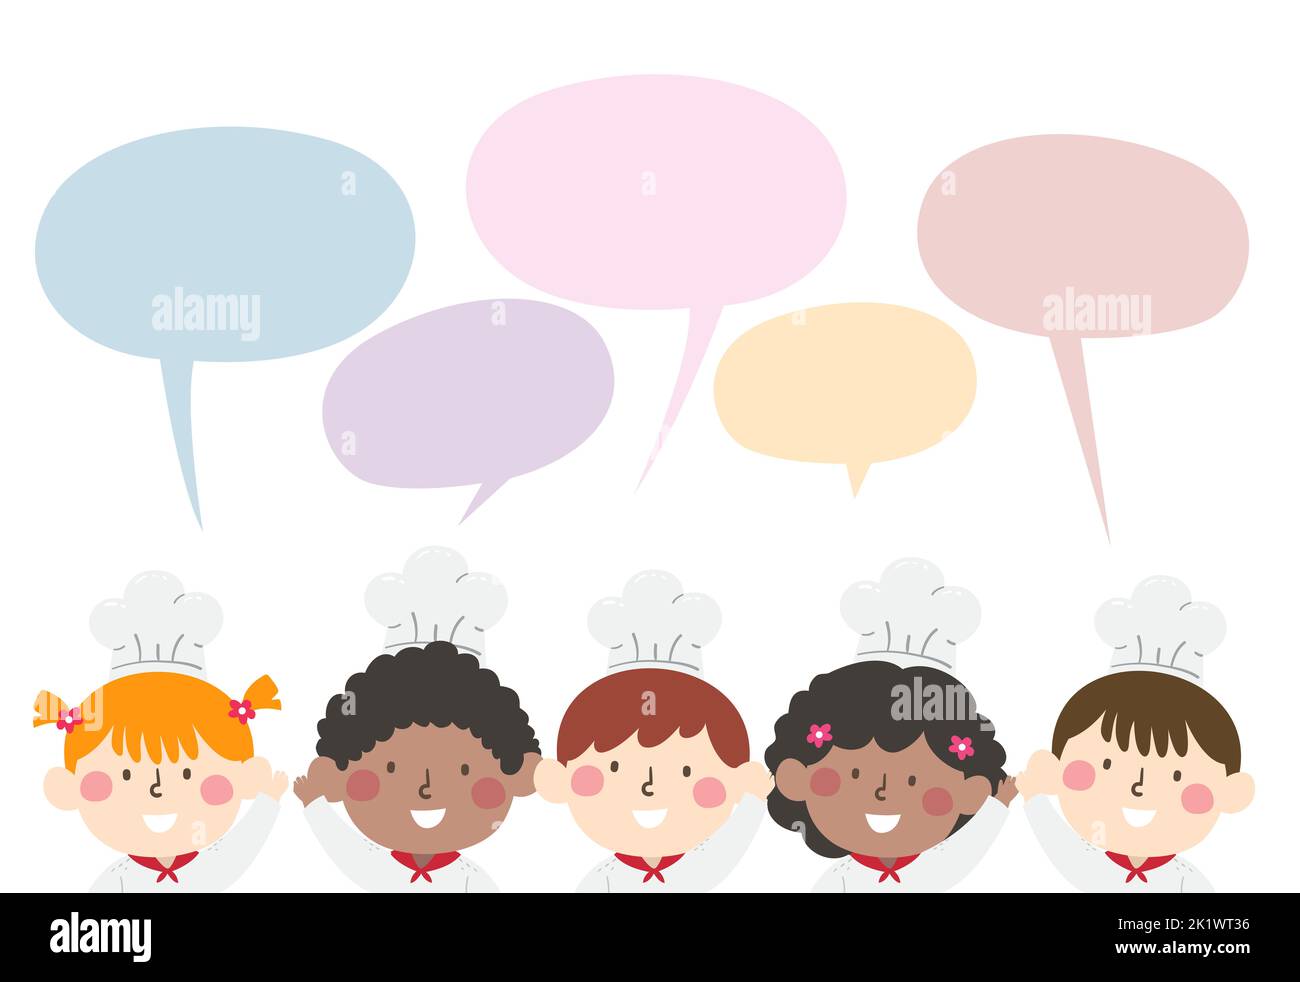 Illustration of Kids Chefs Waving Hello with Blank Speech Bubbles Stock Photo